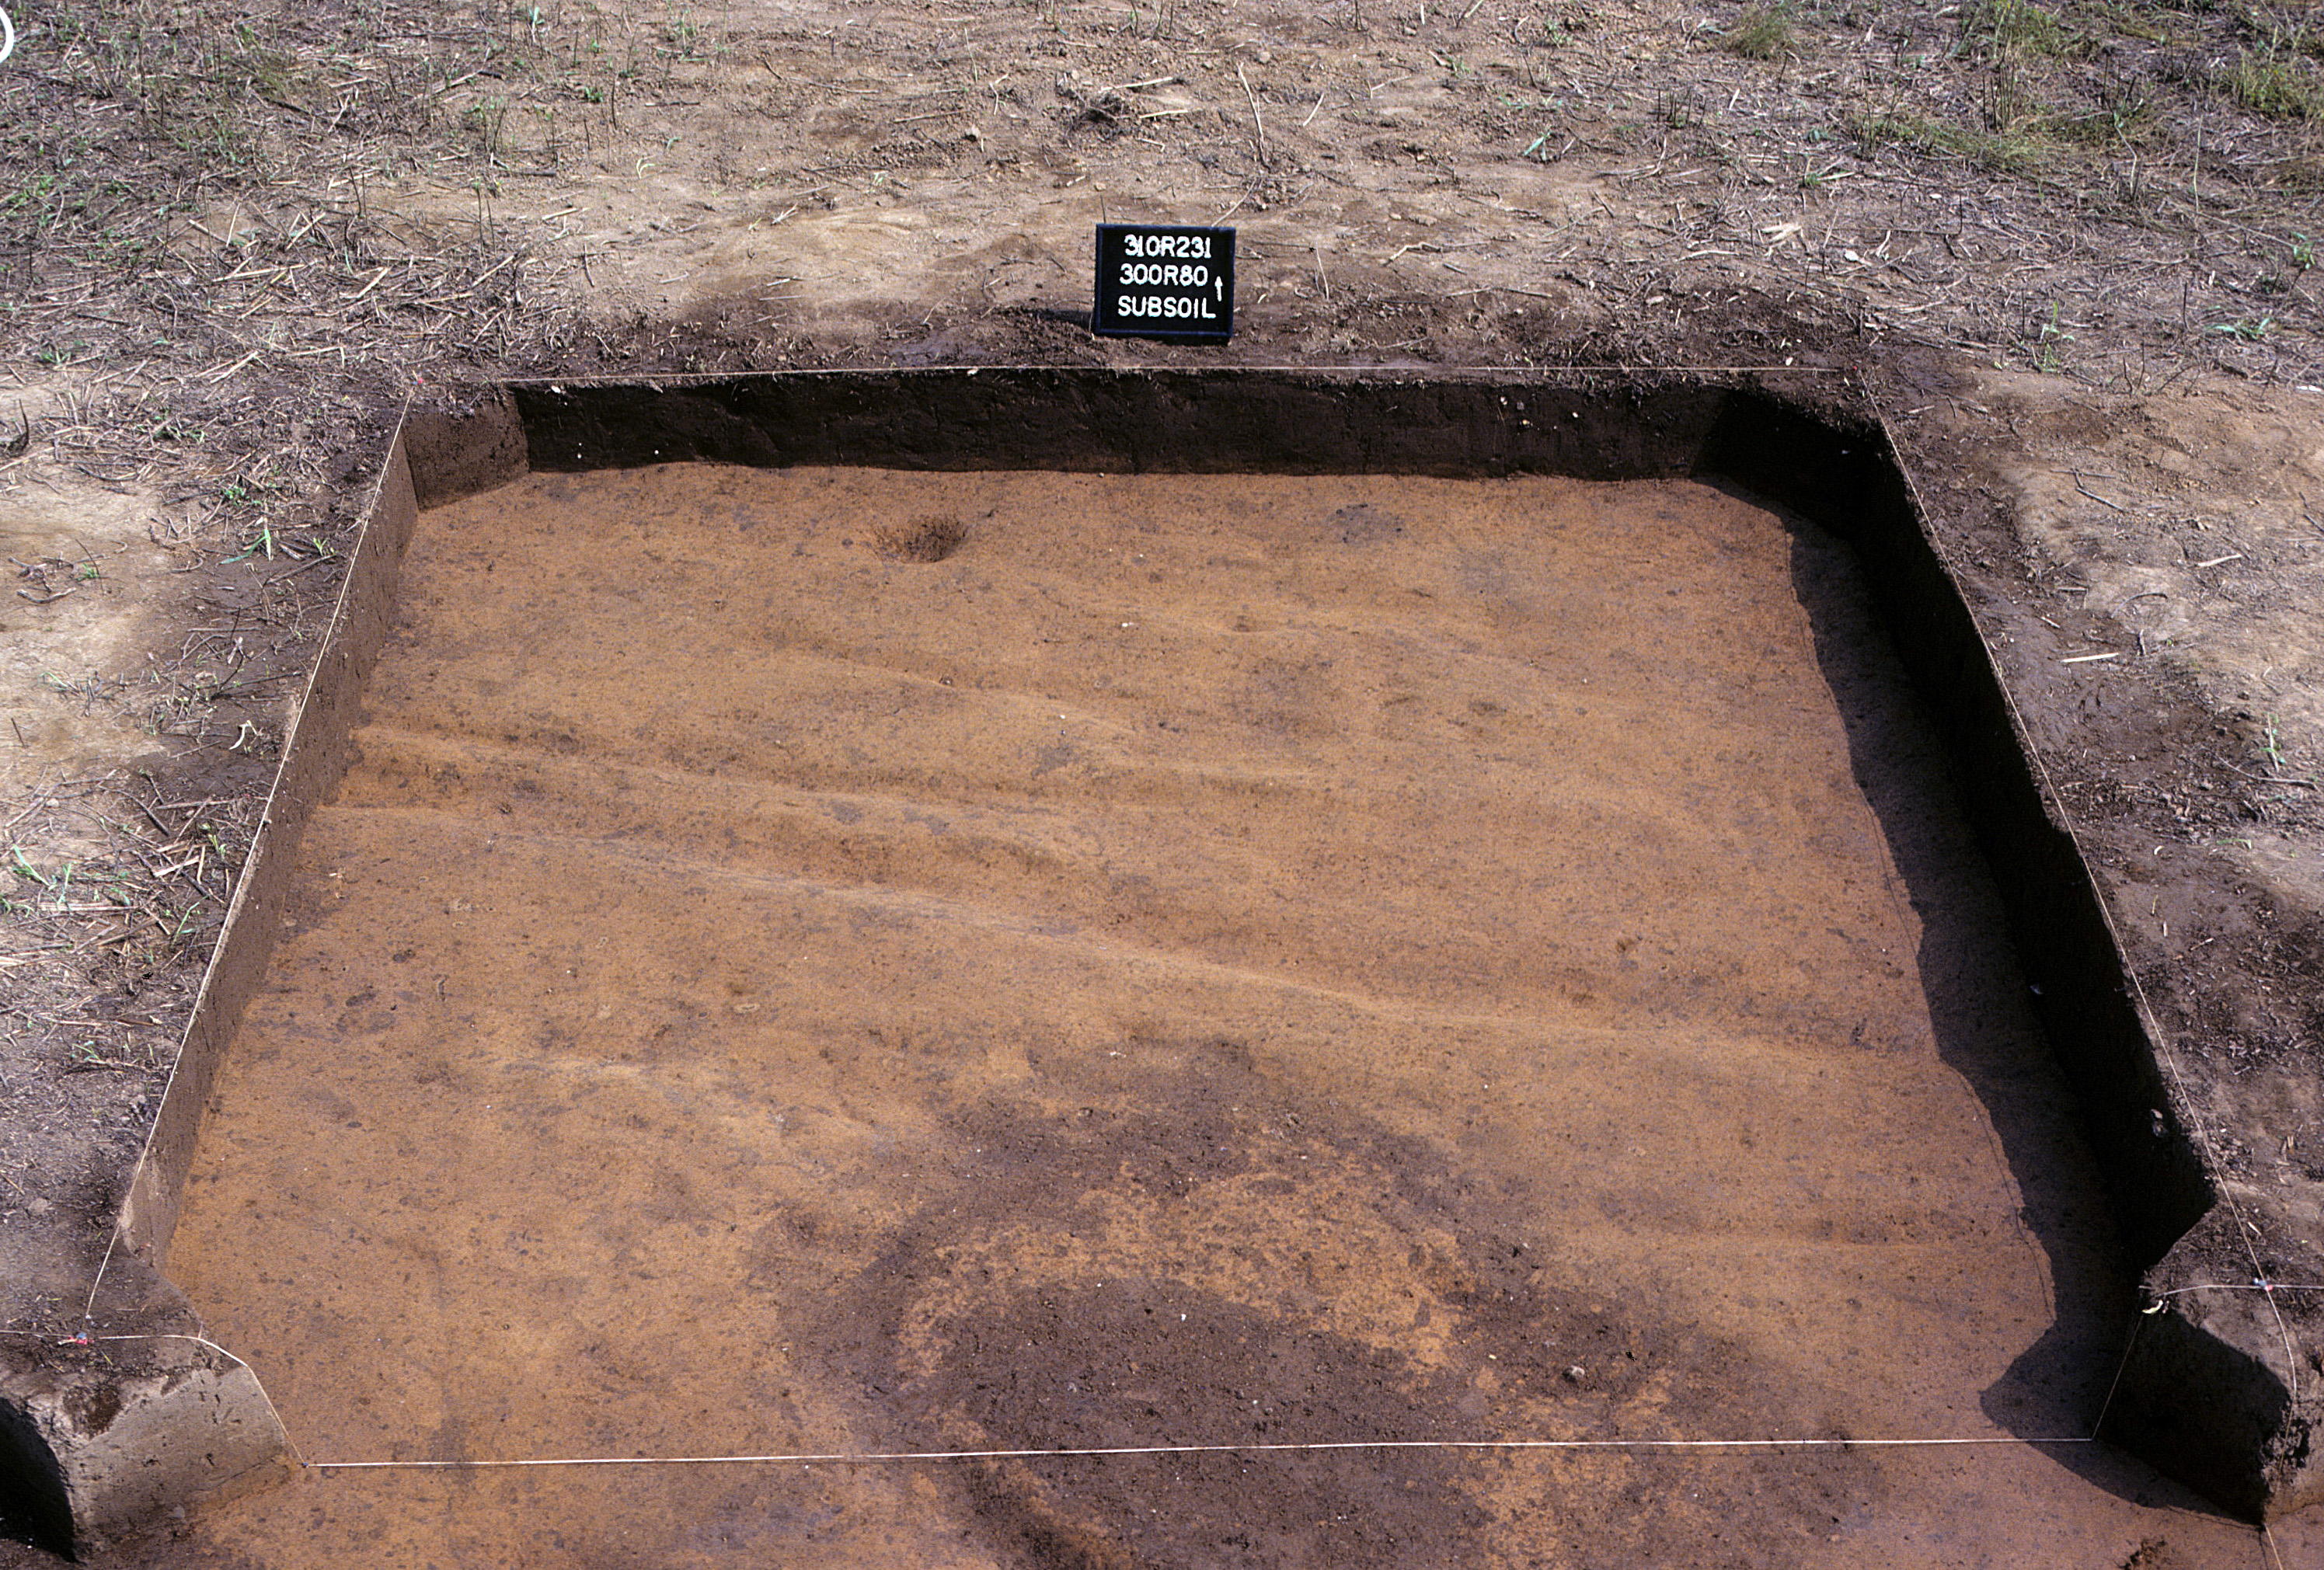 Figure 1007. Sq. 300R80 at top of subsoil (view to north).